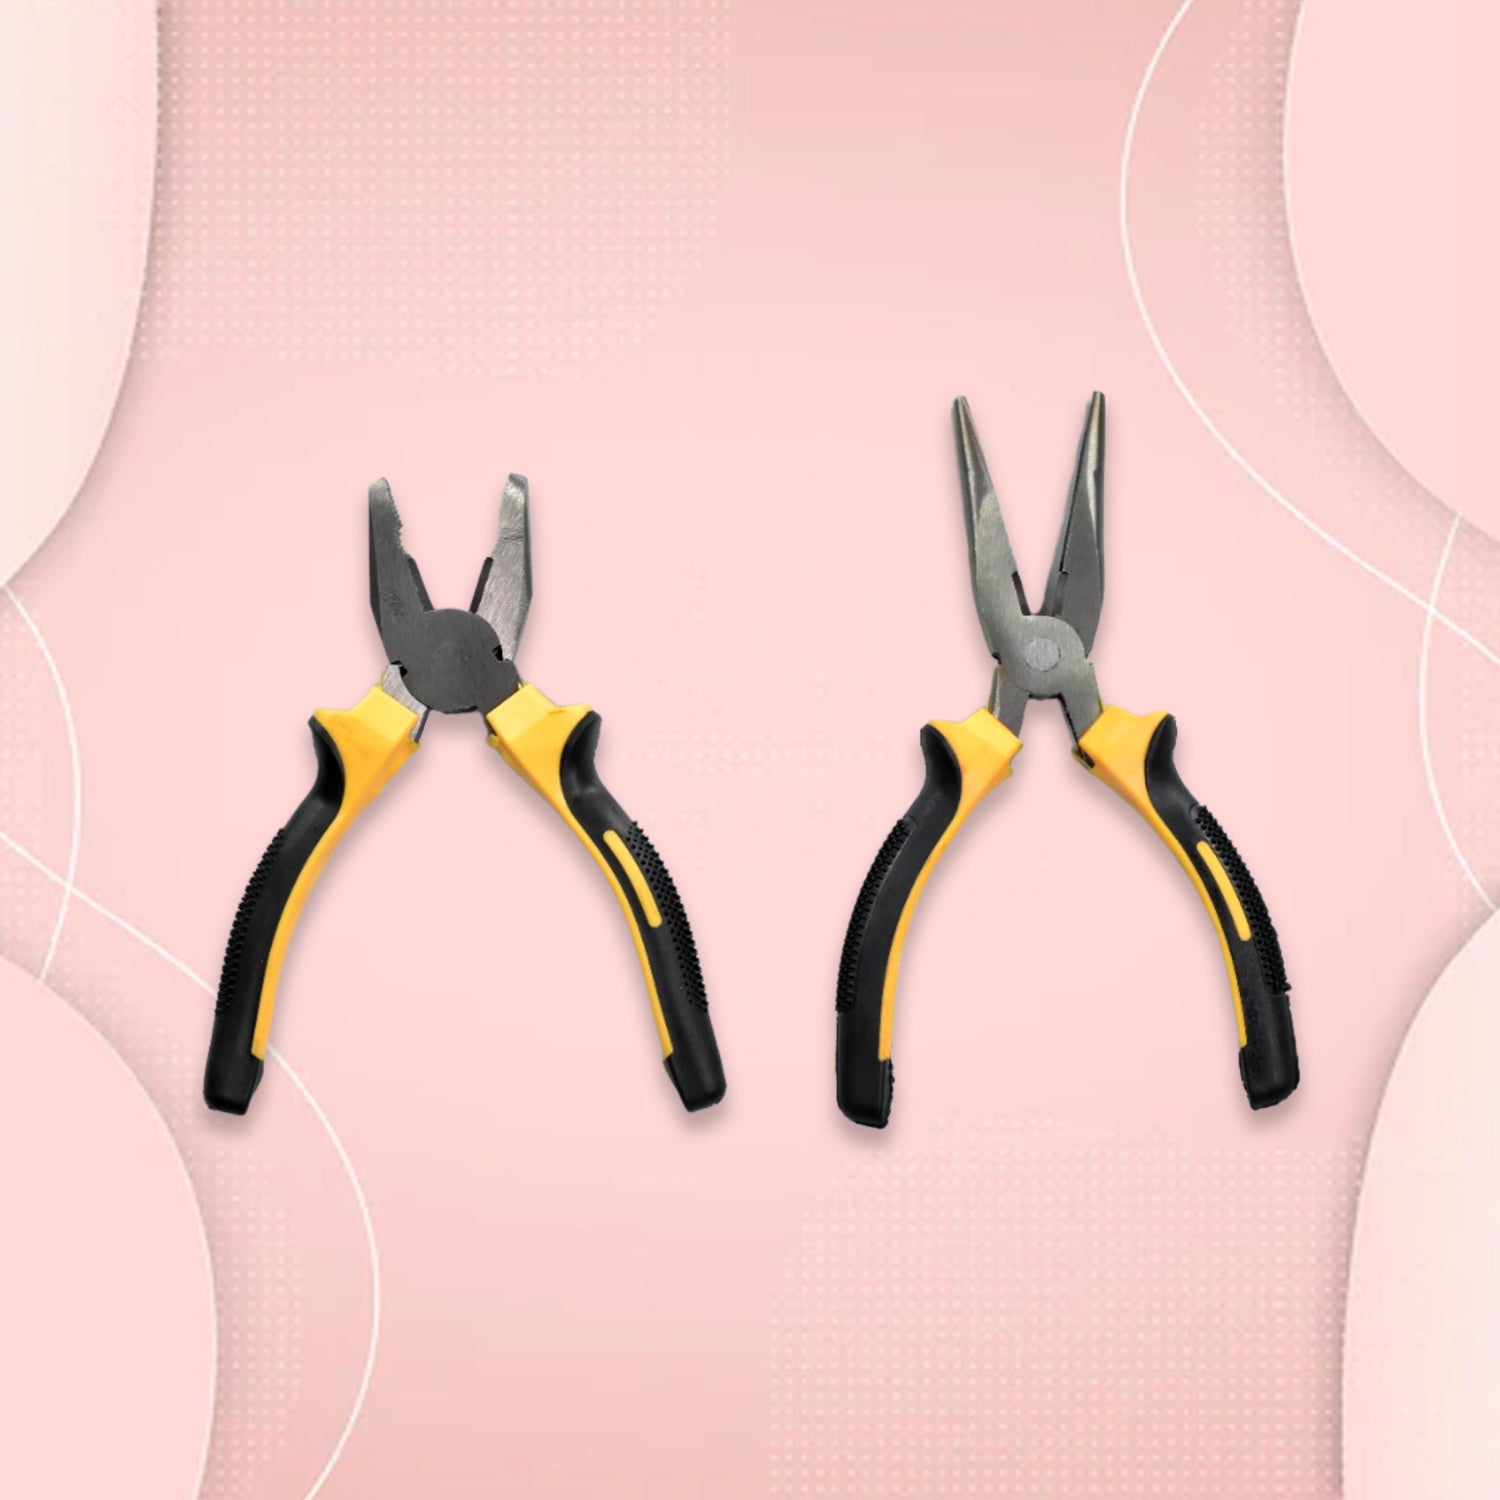 9172 Sturdy Steel Combination Plier for Home & Professional Use 2pc DeoDap